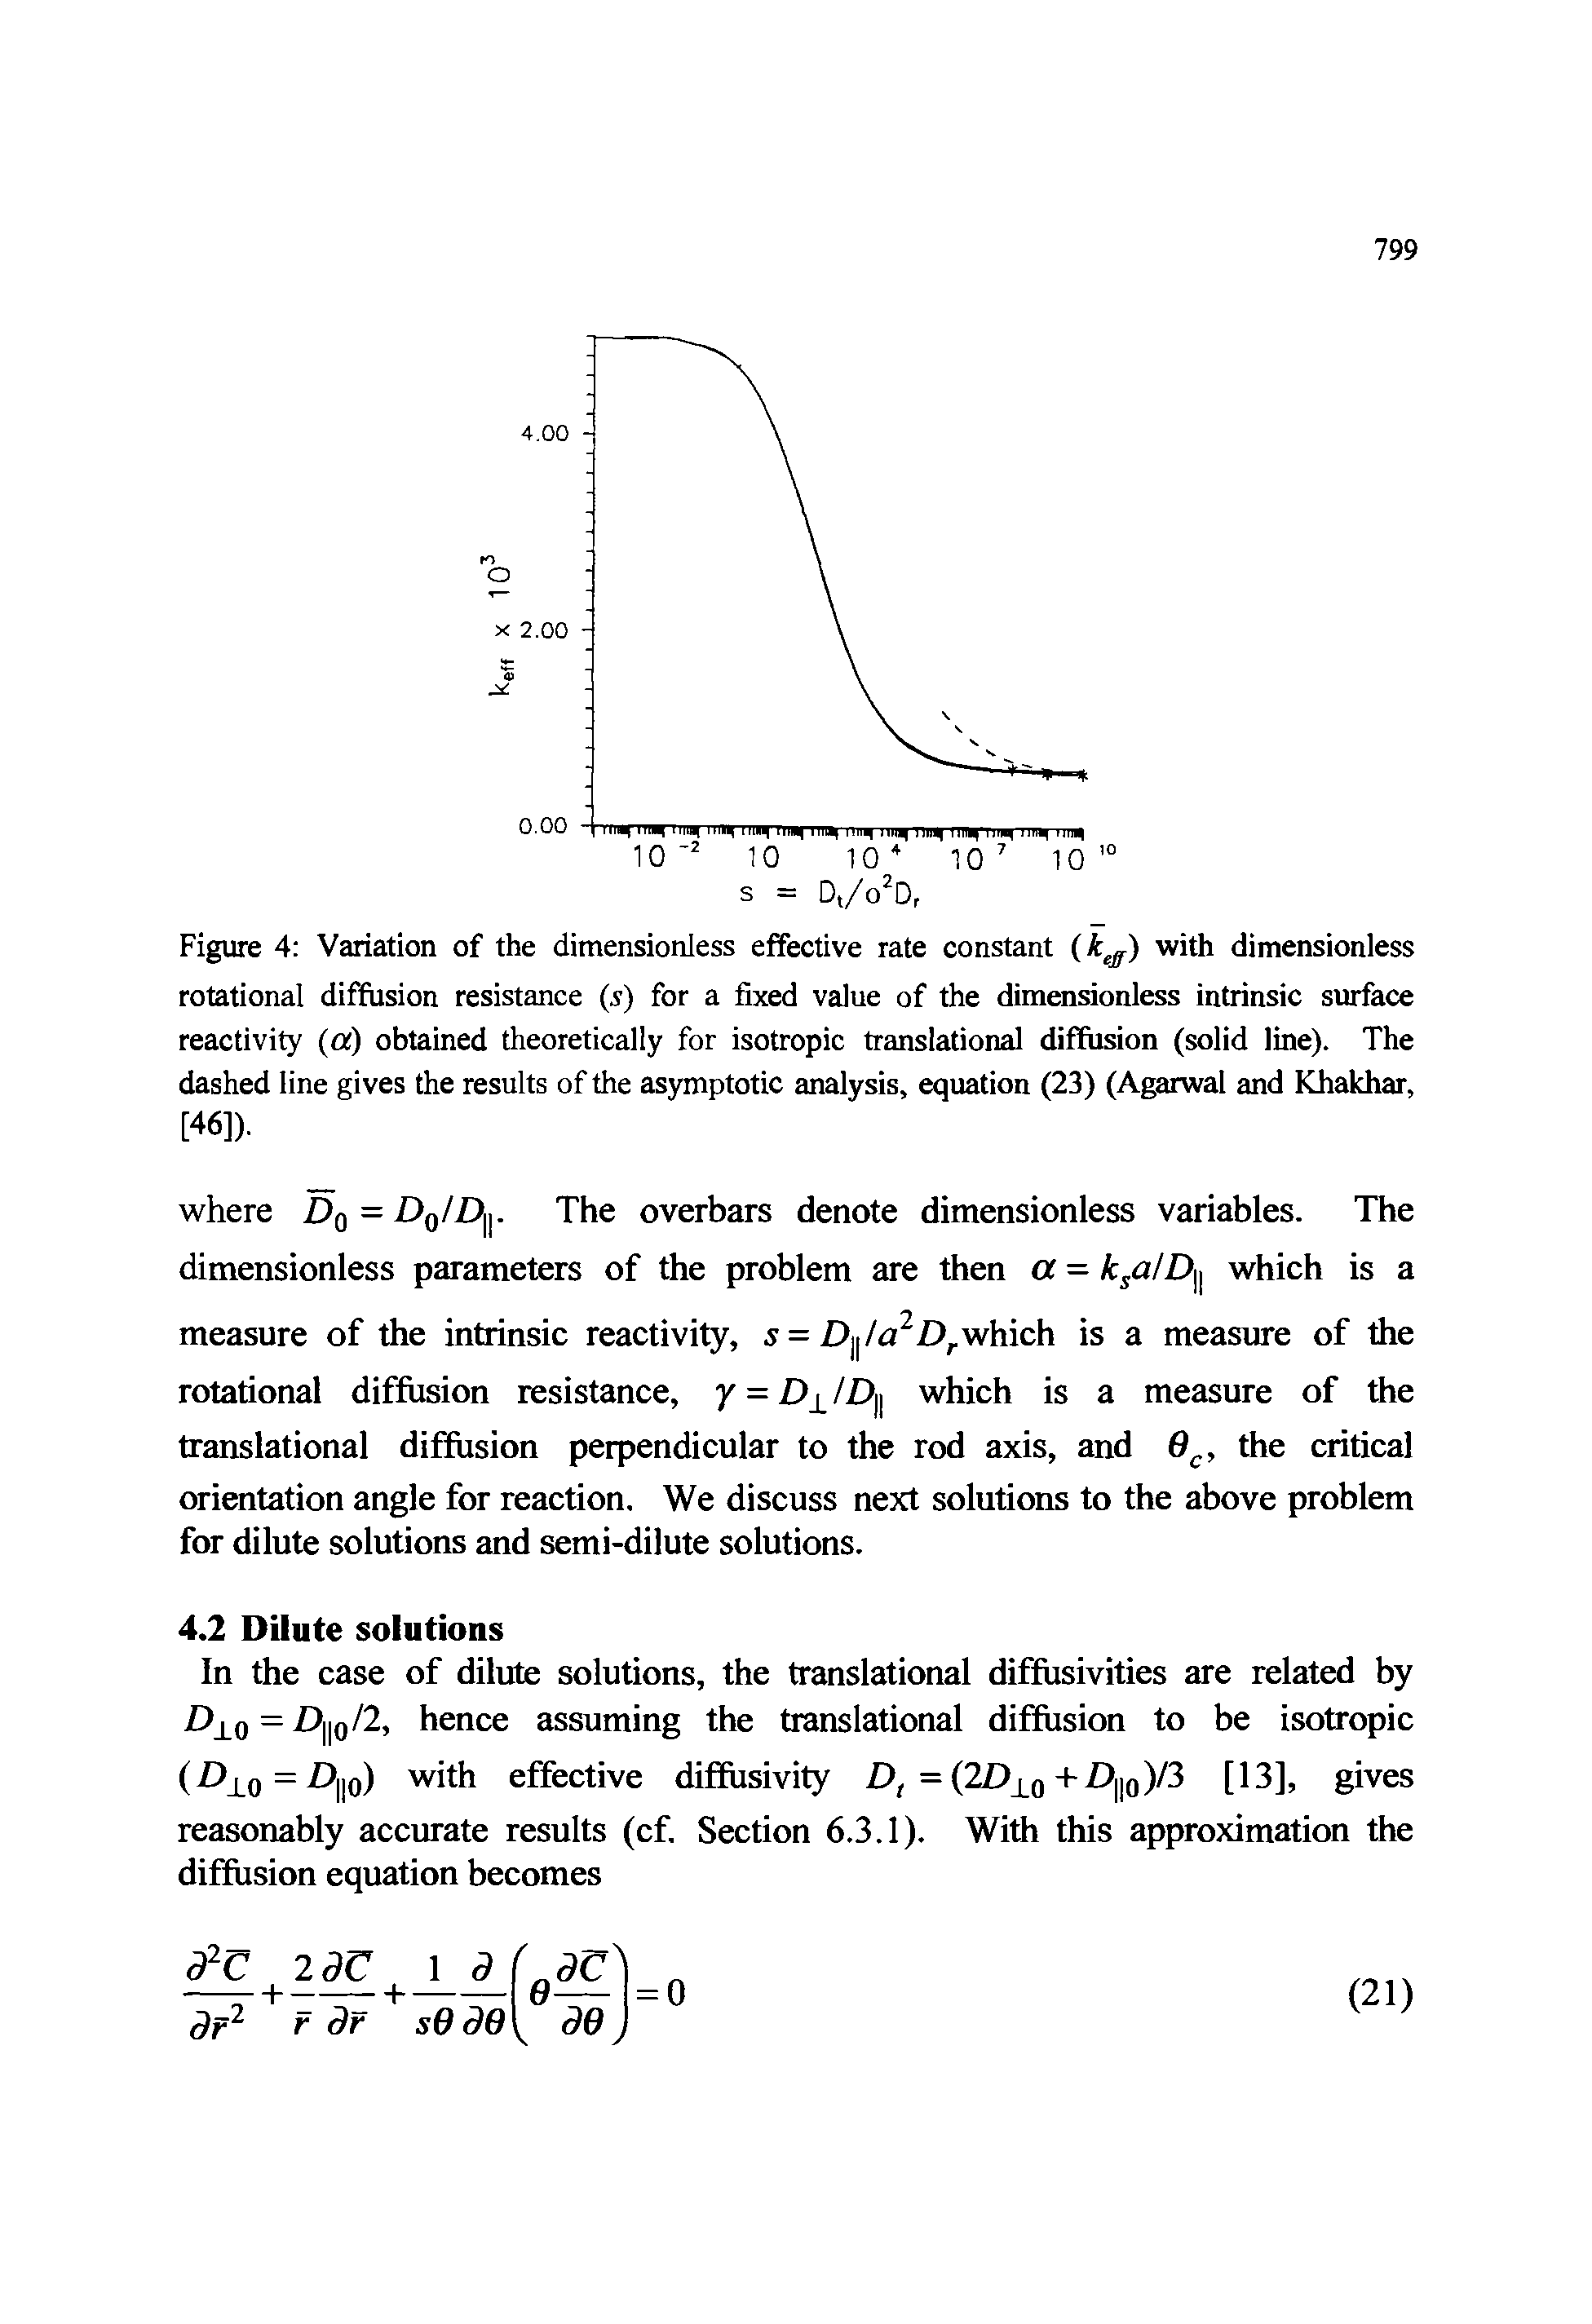 Figure 4 Variation of the dimensionless effective rate constant k ) with dimensionless rotational diffusion resistance ( ) for a fixed value of the dimensionless intrinsic surface reactivity a) obtained theoretically for isotropic translational diffusion (solid line). The dashed line gives the results of the asymptotic analysis, equation (23) (Agarwal and Khakhar, [46]).